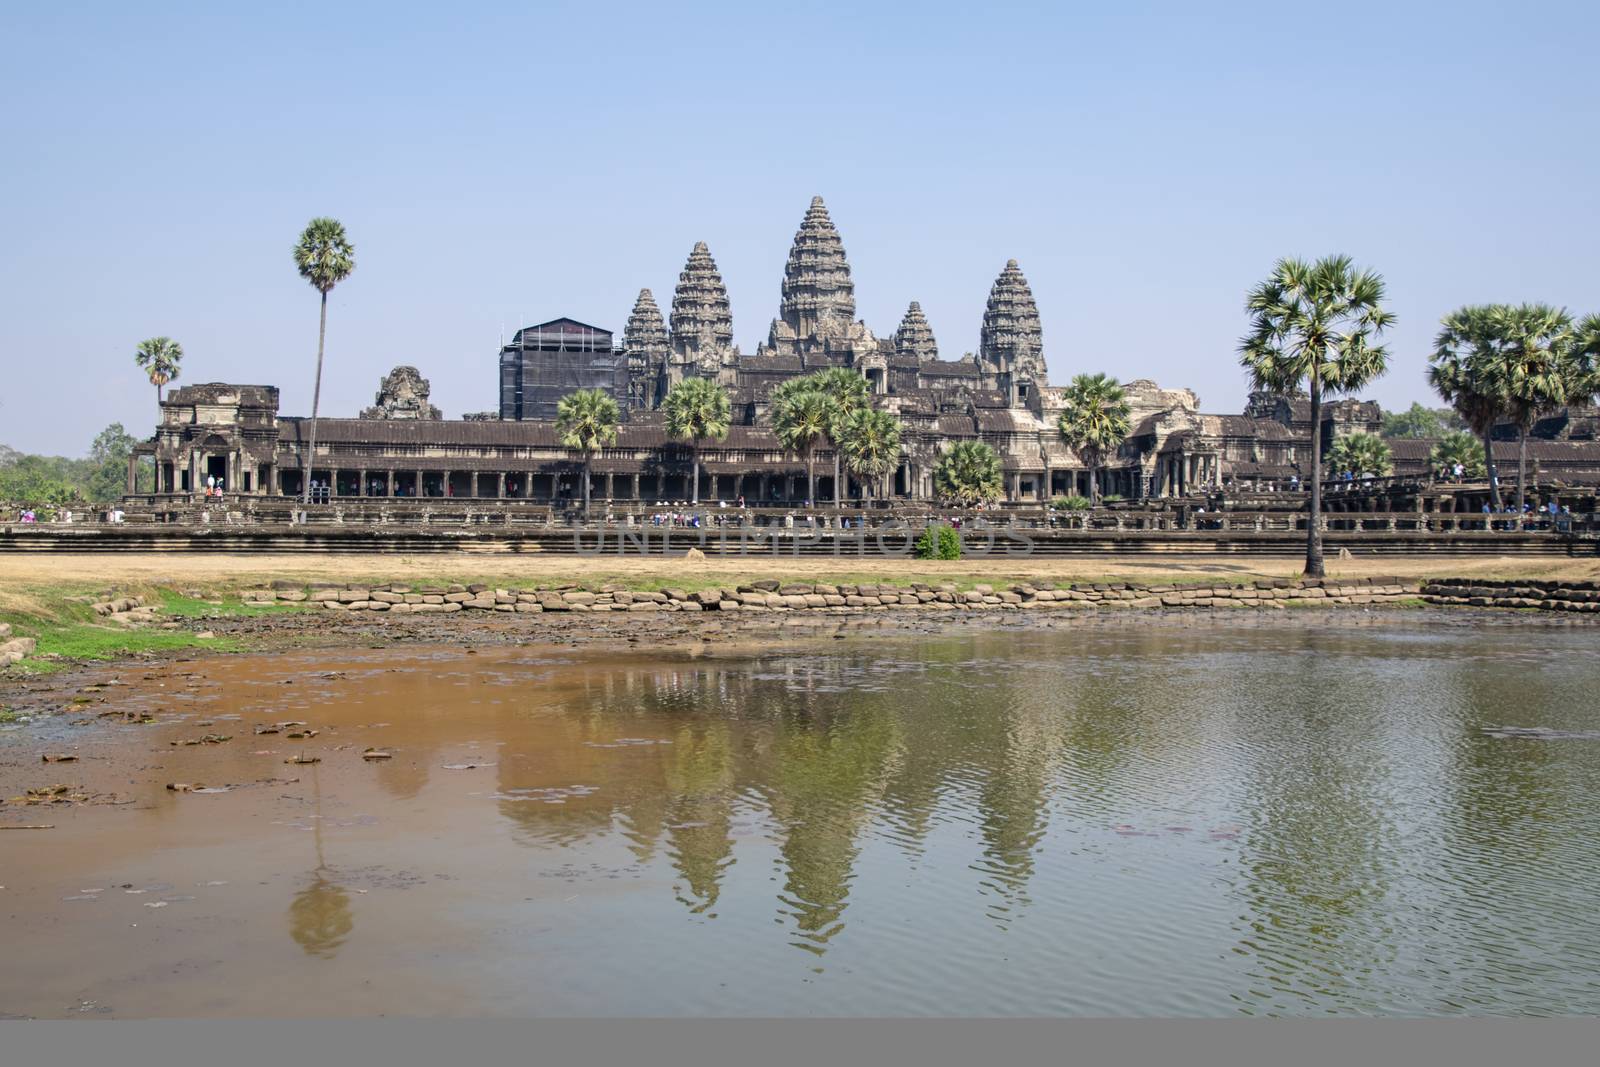 Angkor Wat, Cambodia - March 2016: View of the main temple at Angkor wat. Originally constructed in the early 12th century, the ruins are a huge tourist attraction as well as a place of worship today